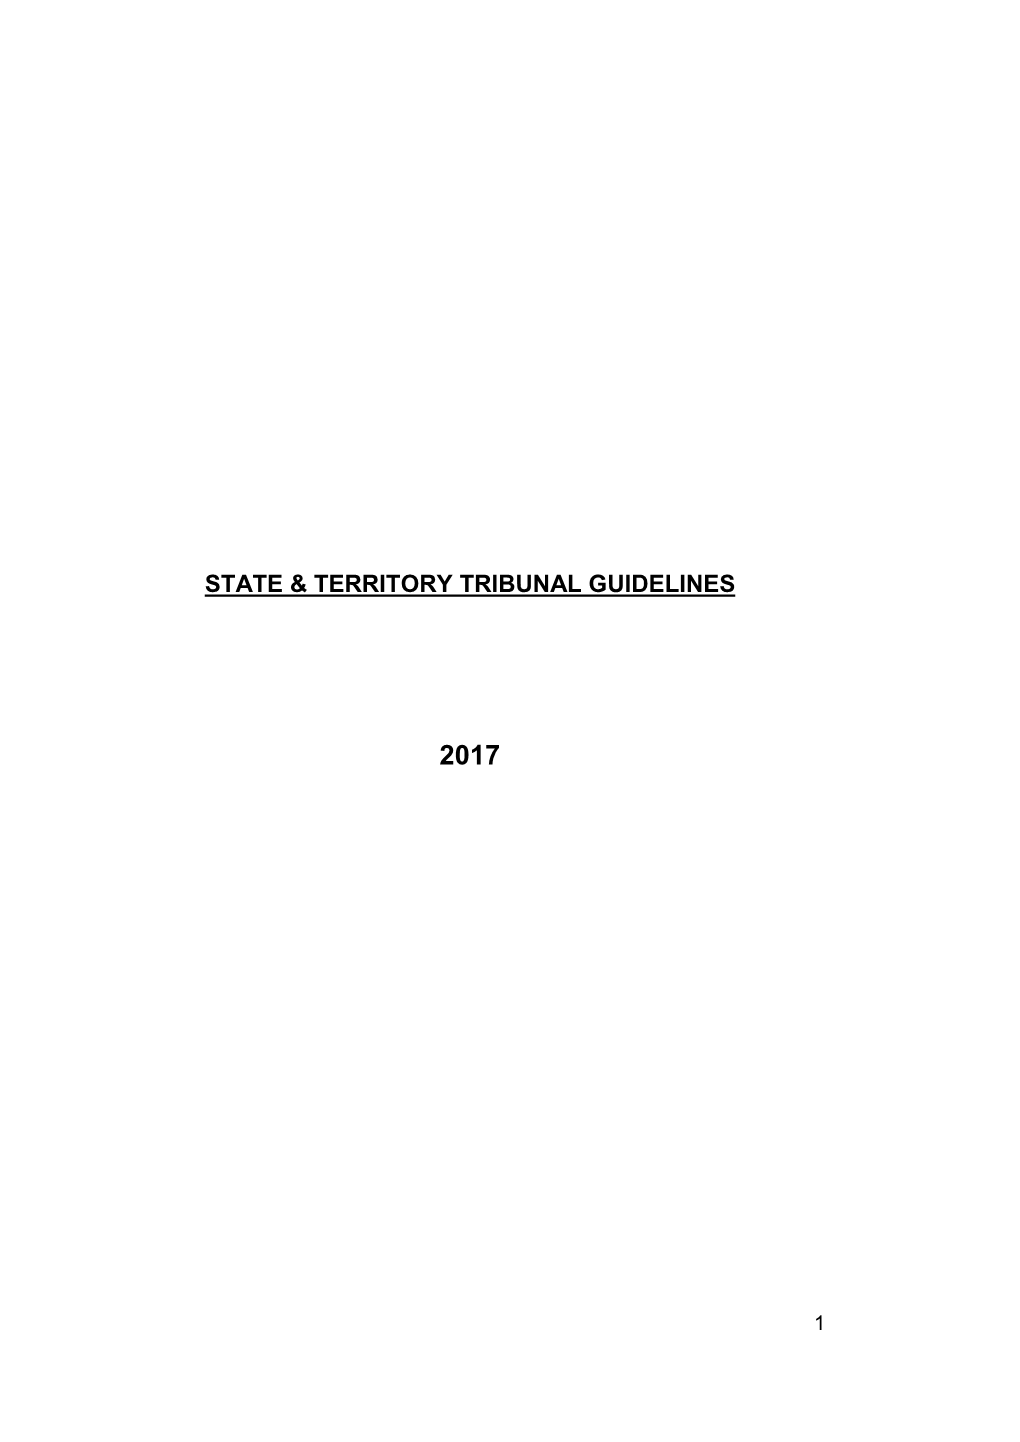 State & Territory Tribunal Guidelines